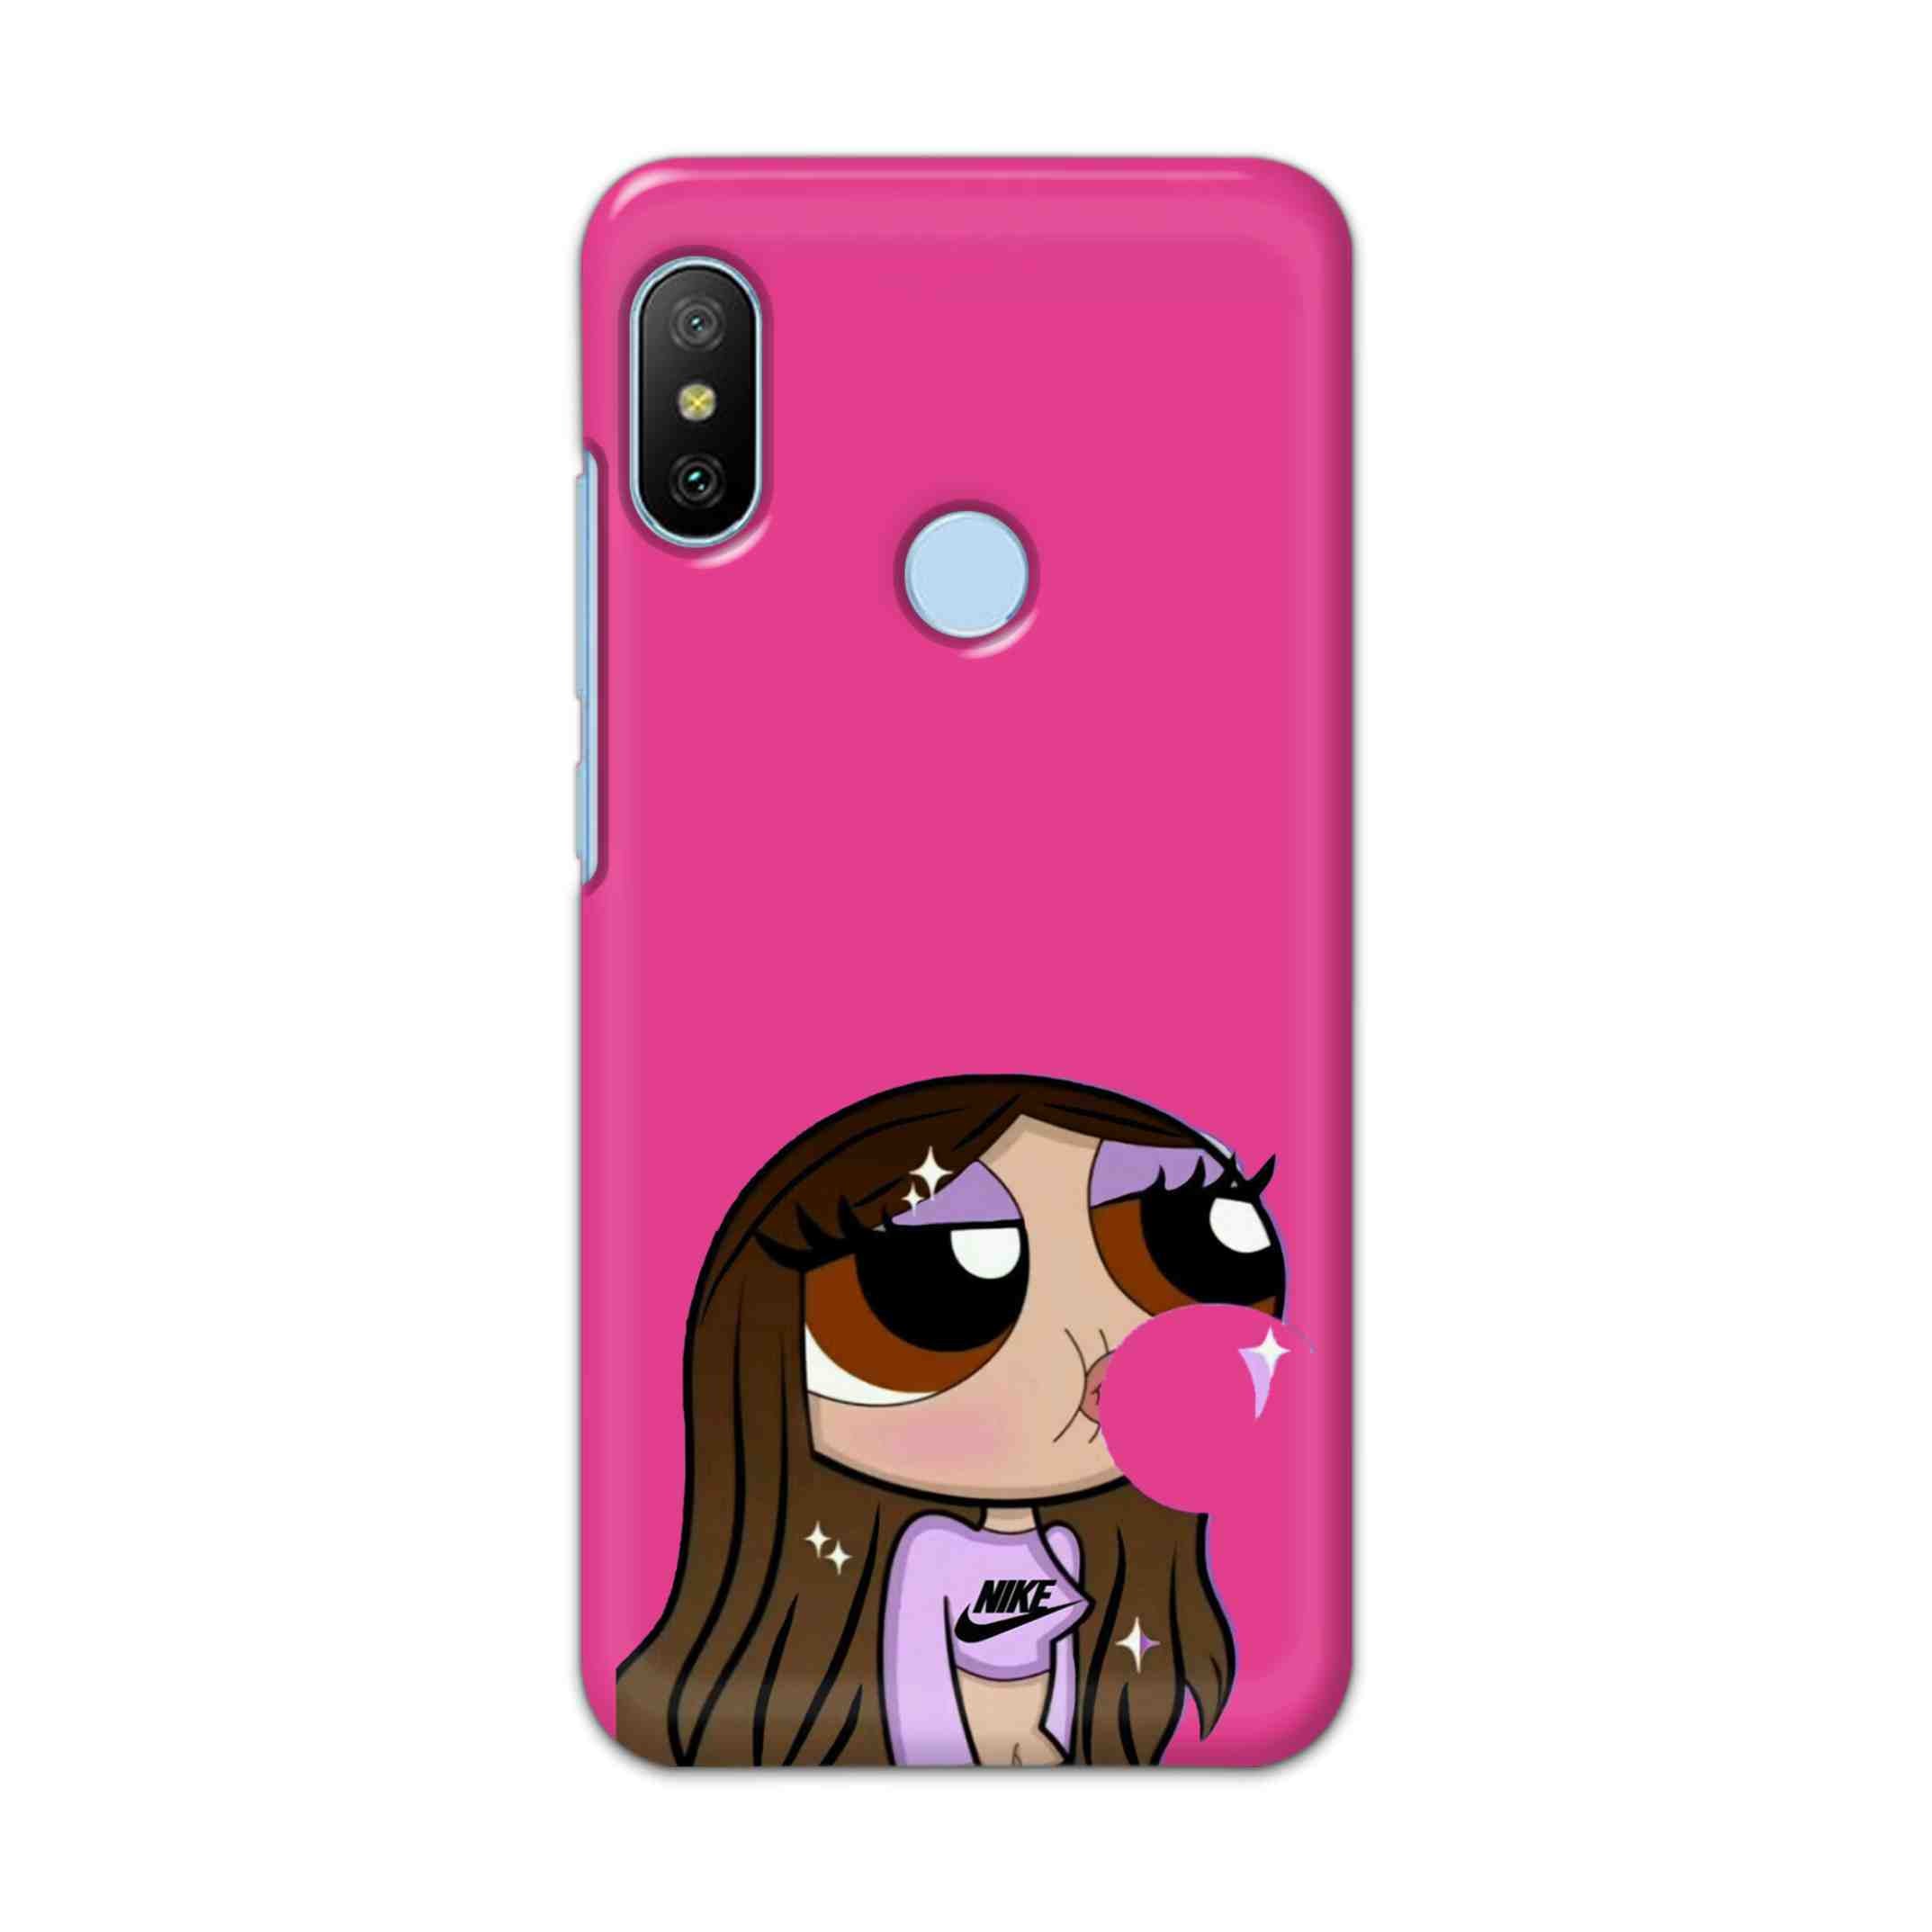 Buy Bubble Girl Hard Back Mobile Phone Case/Cover For Xiaomi Redmi 6 Pro Online